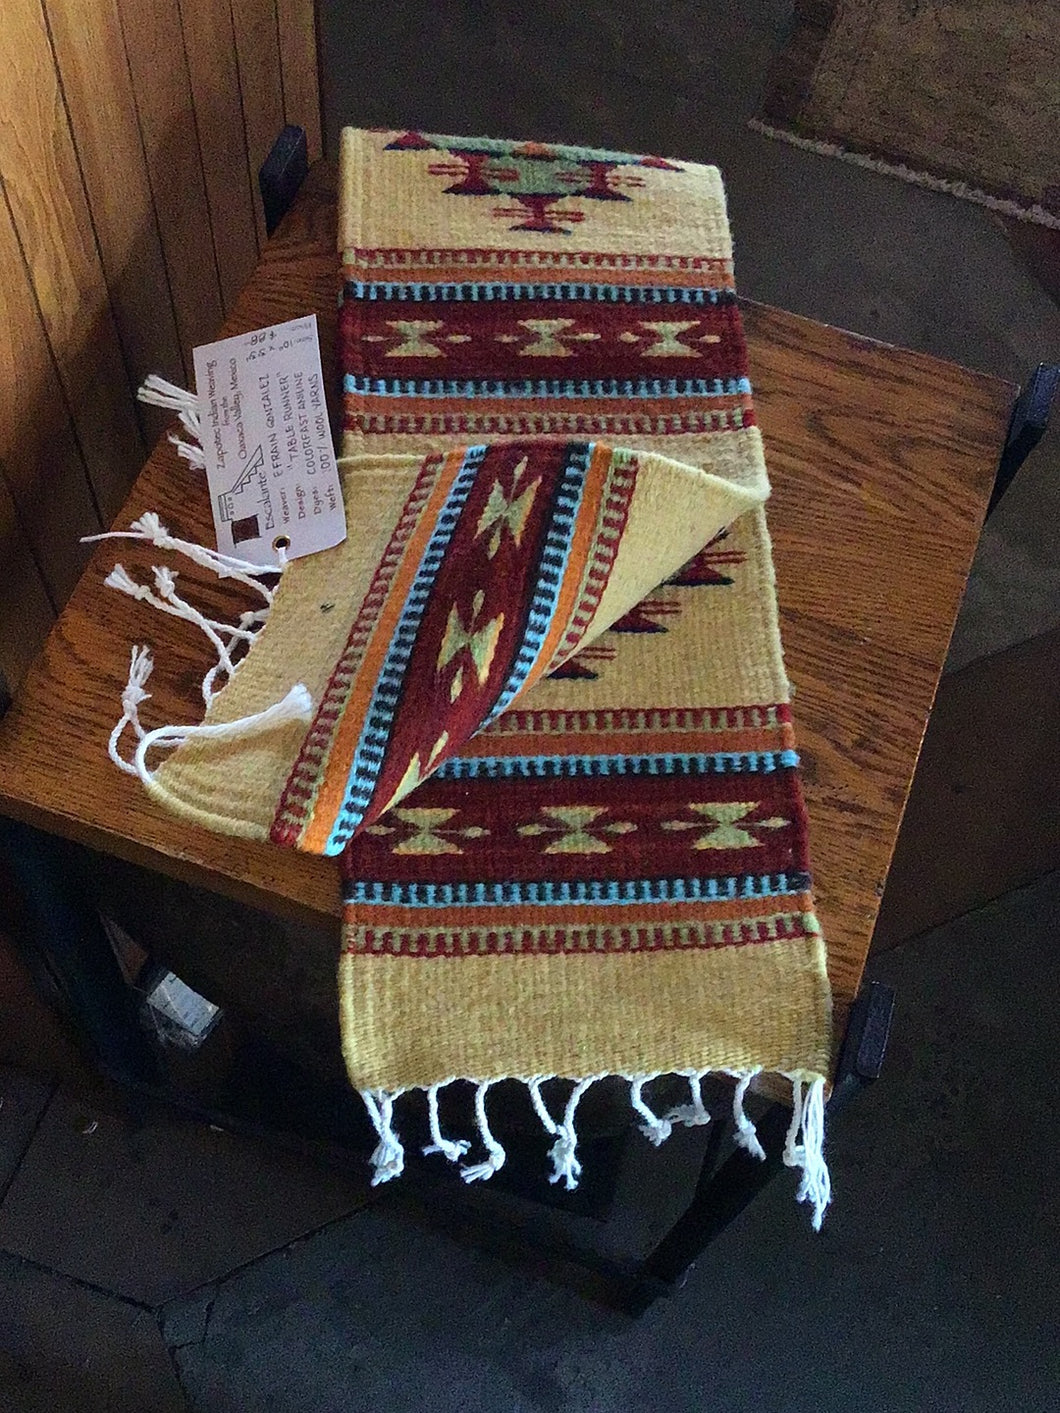 Zapotec Small Table Runner 10”x3’3”